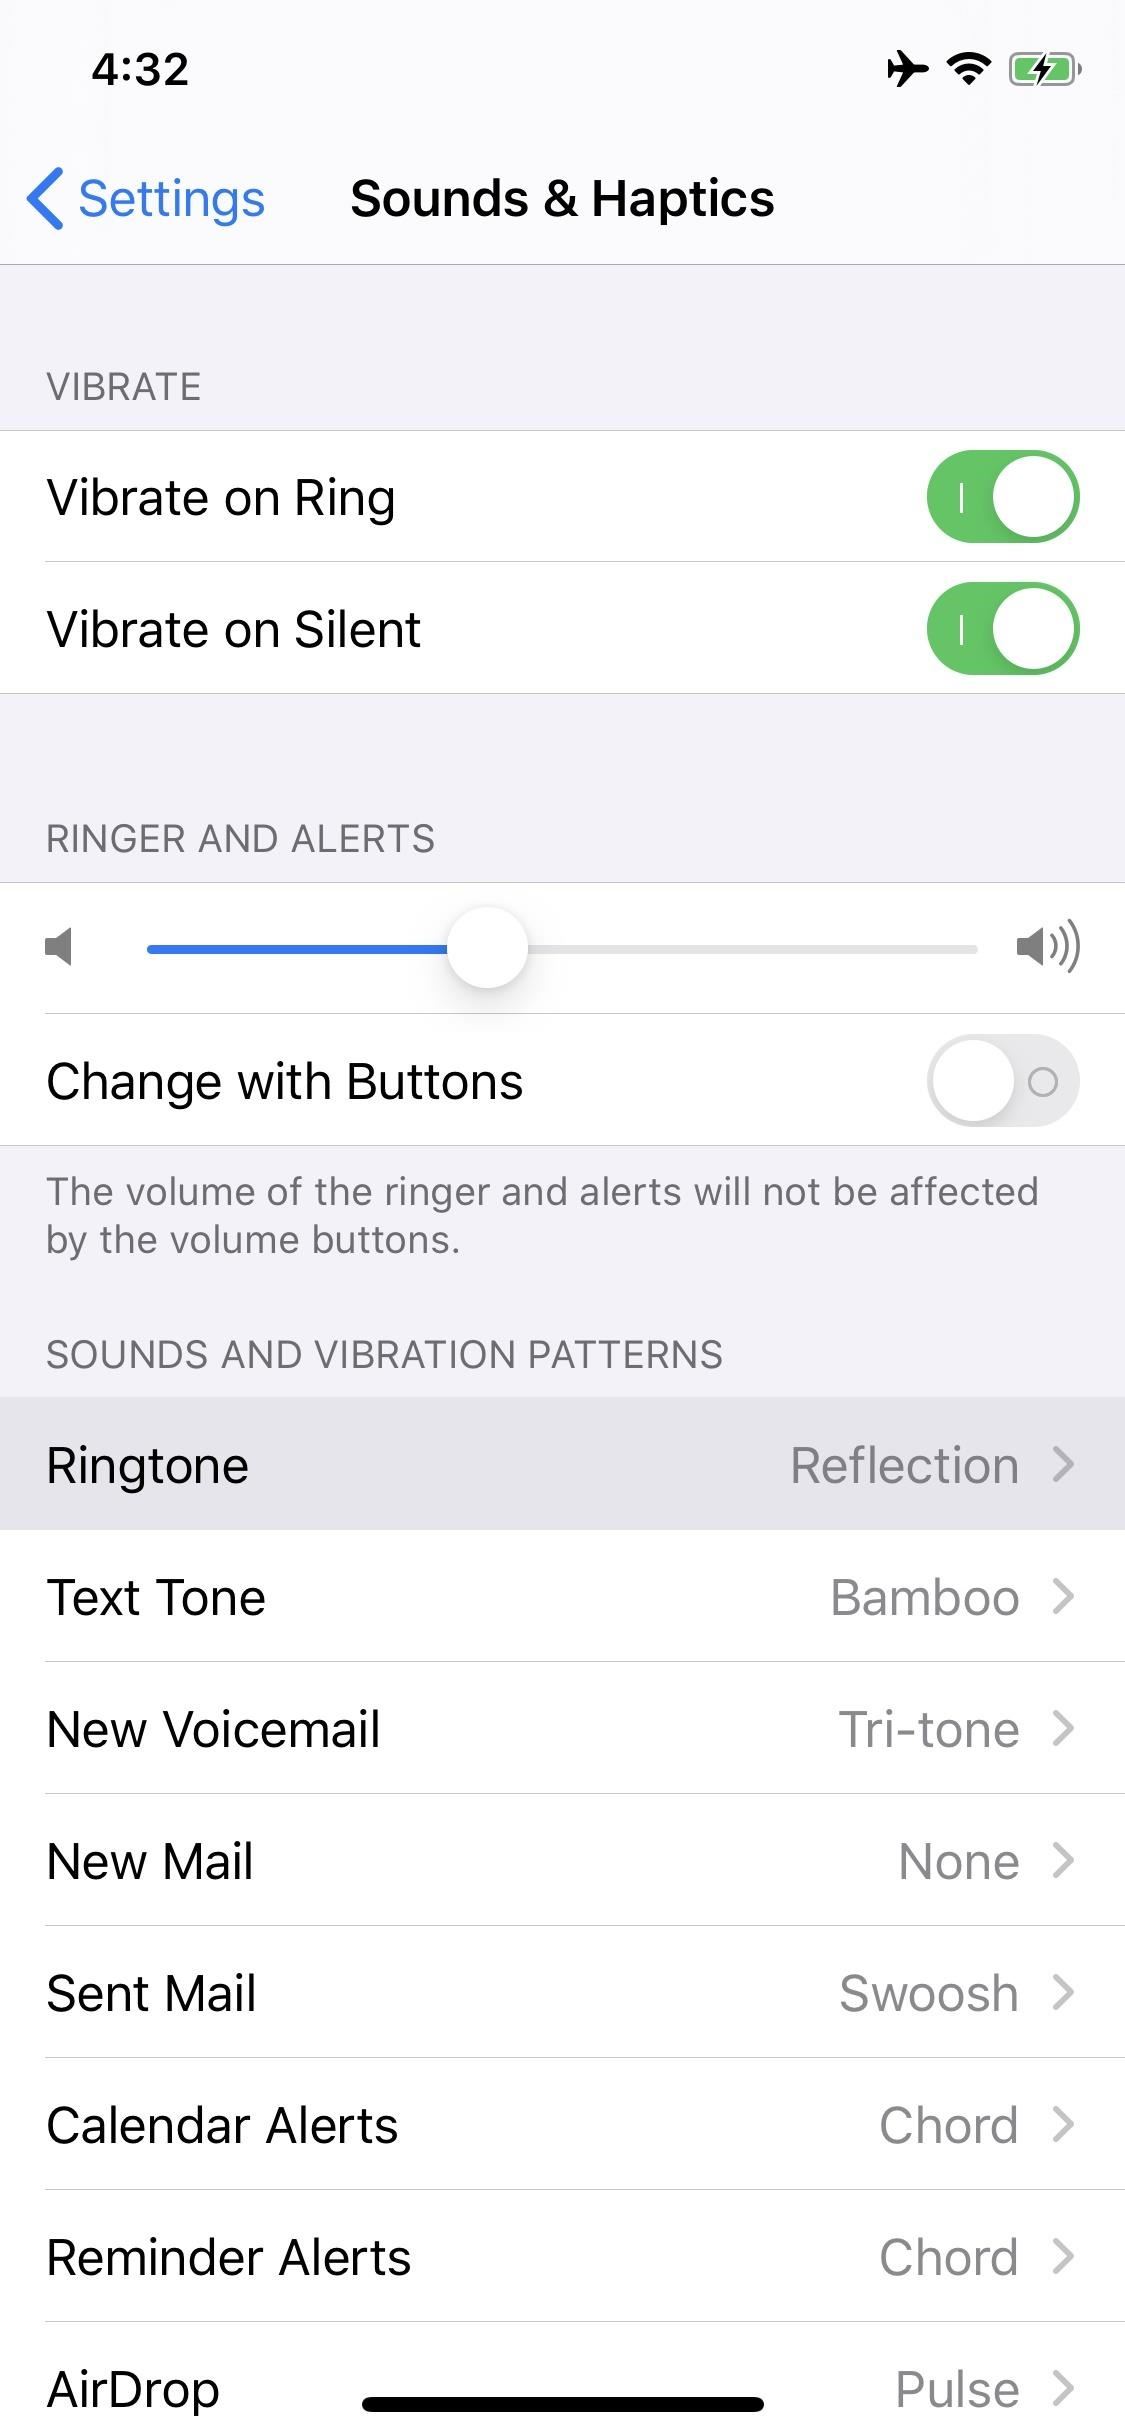 How to Create Ringtones for Your iPhone Using 'Music' in macOS 10.15 Catalina